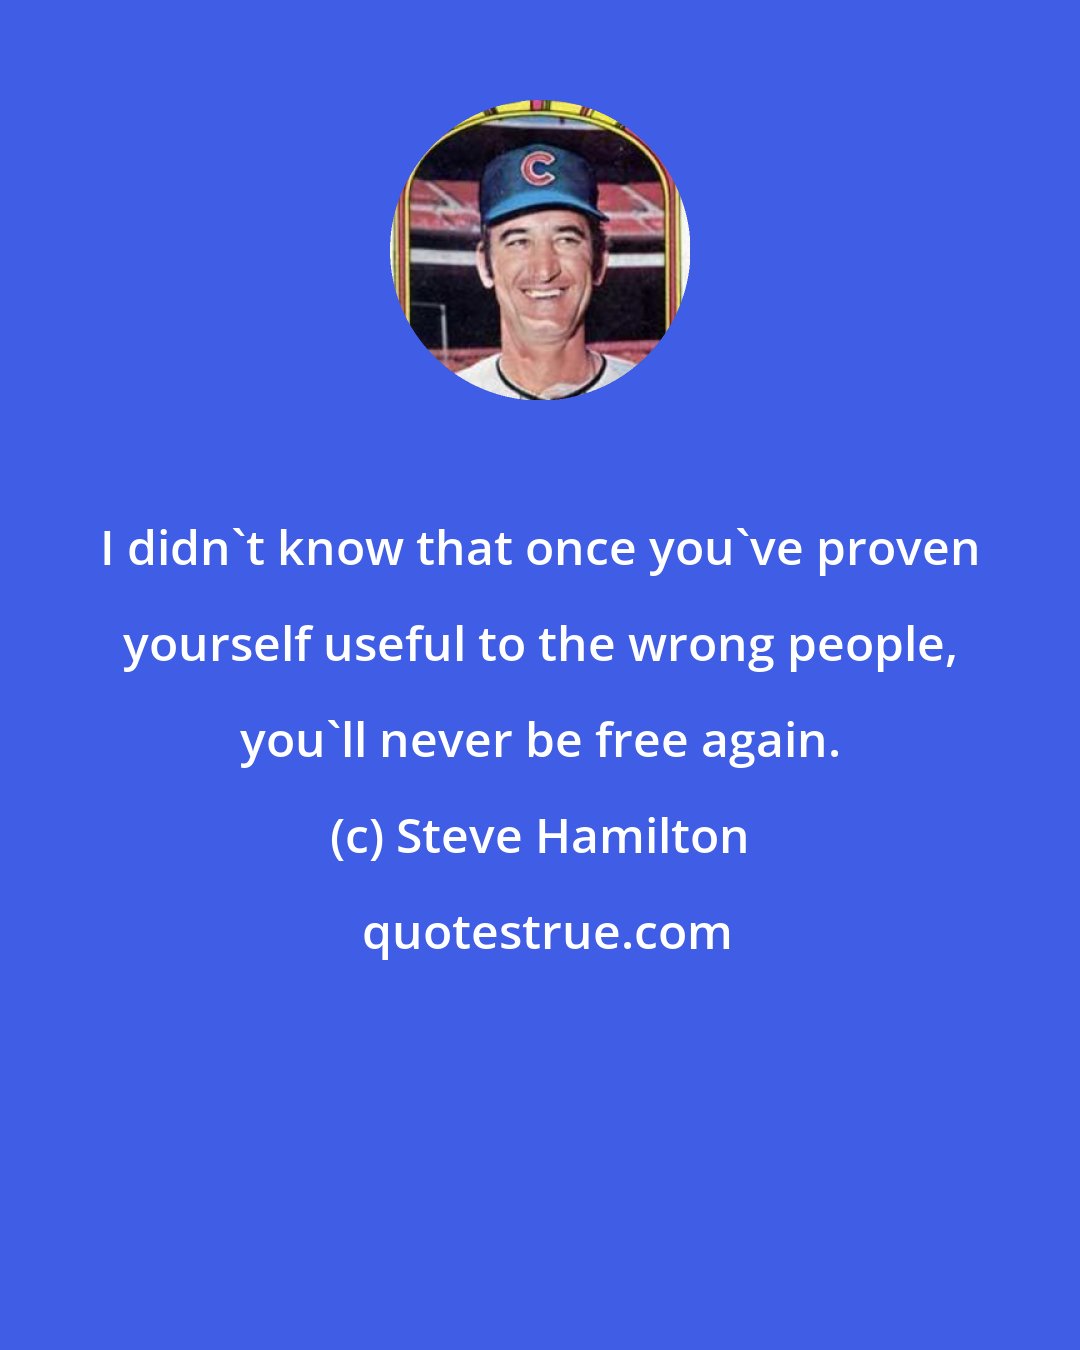 Steve Hamilton: I didn't know that once you've proven yourself useful to the wrong people, you'll never be free again.